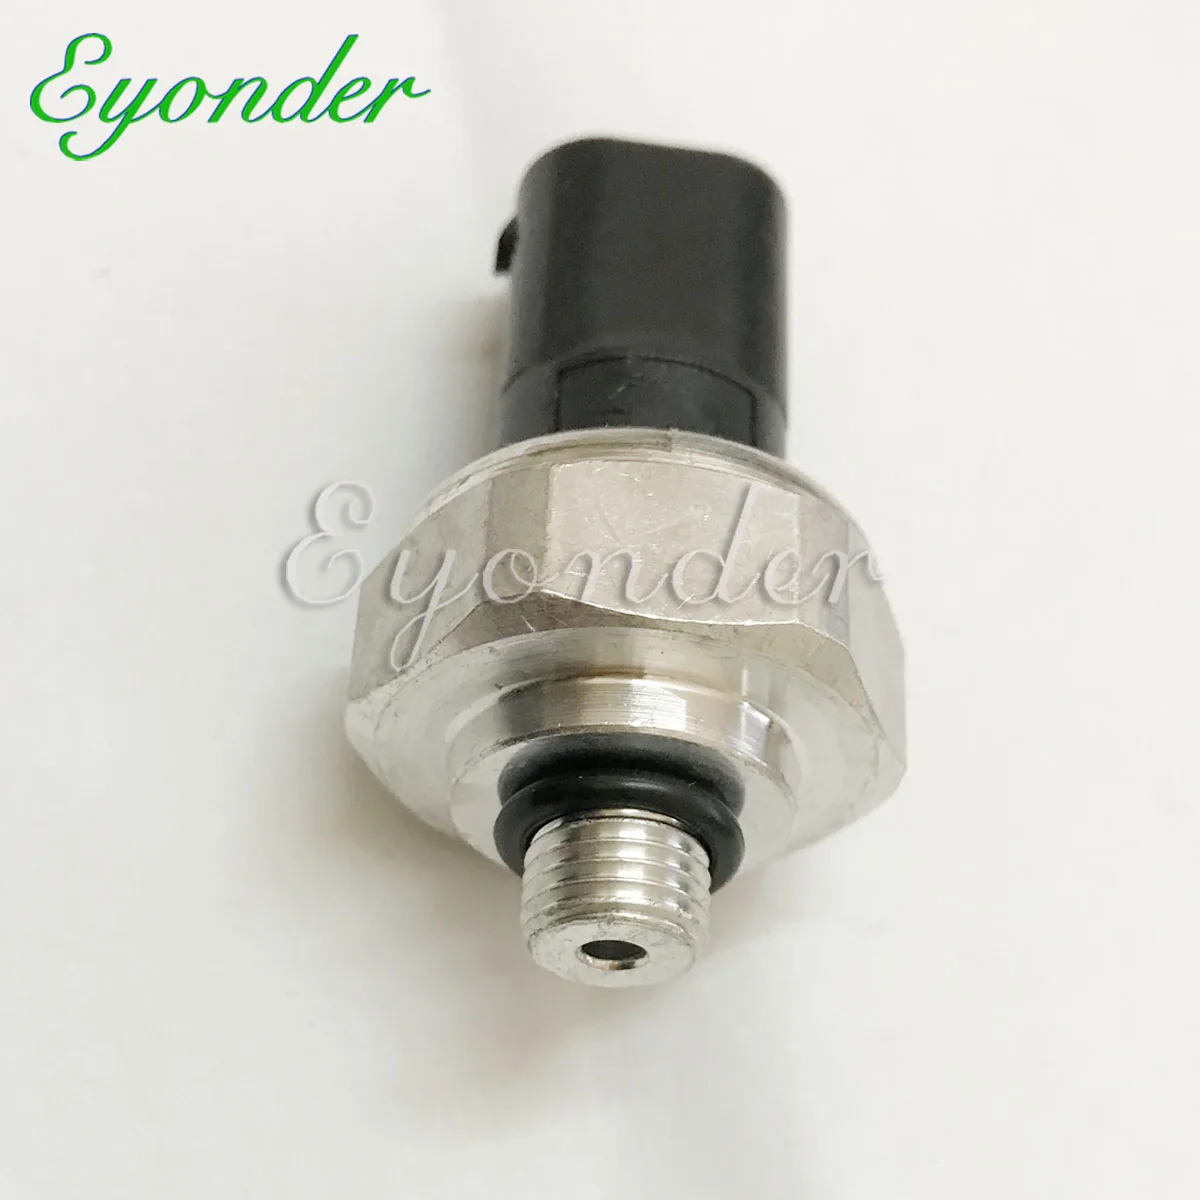 

AC Air Conditioning Pressure Switch for Mercedes Benz W222 V222 X222 W221 S350 S500 S63 S400 S250 S320 S450 S600 S420 S280 S65